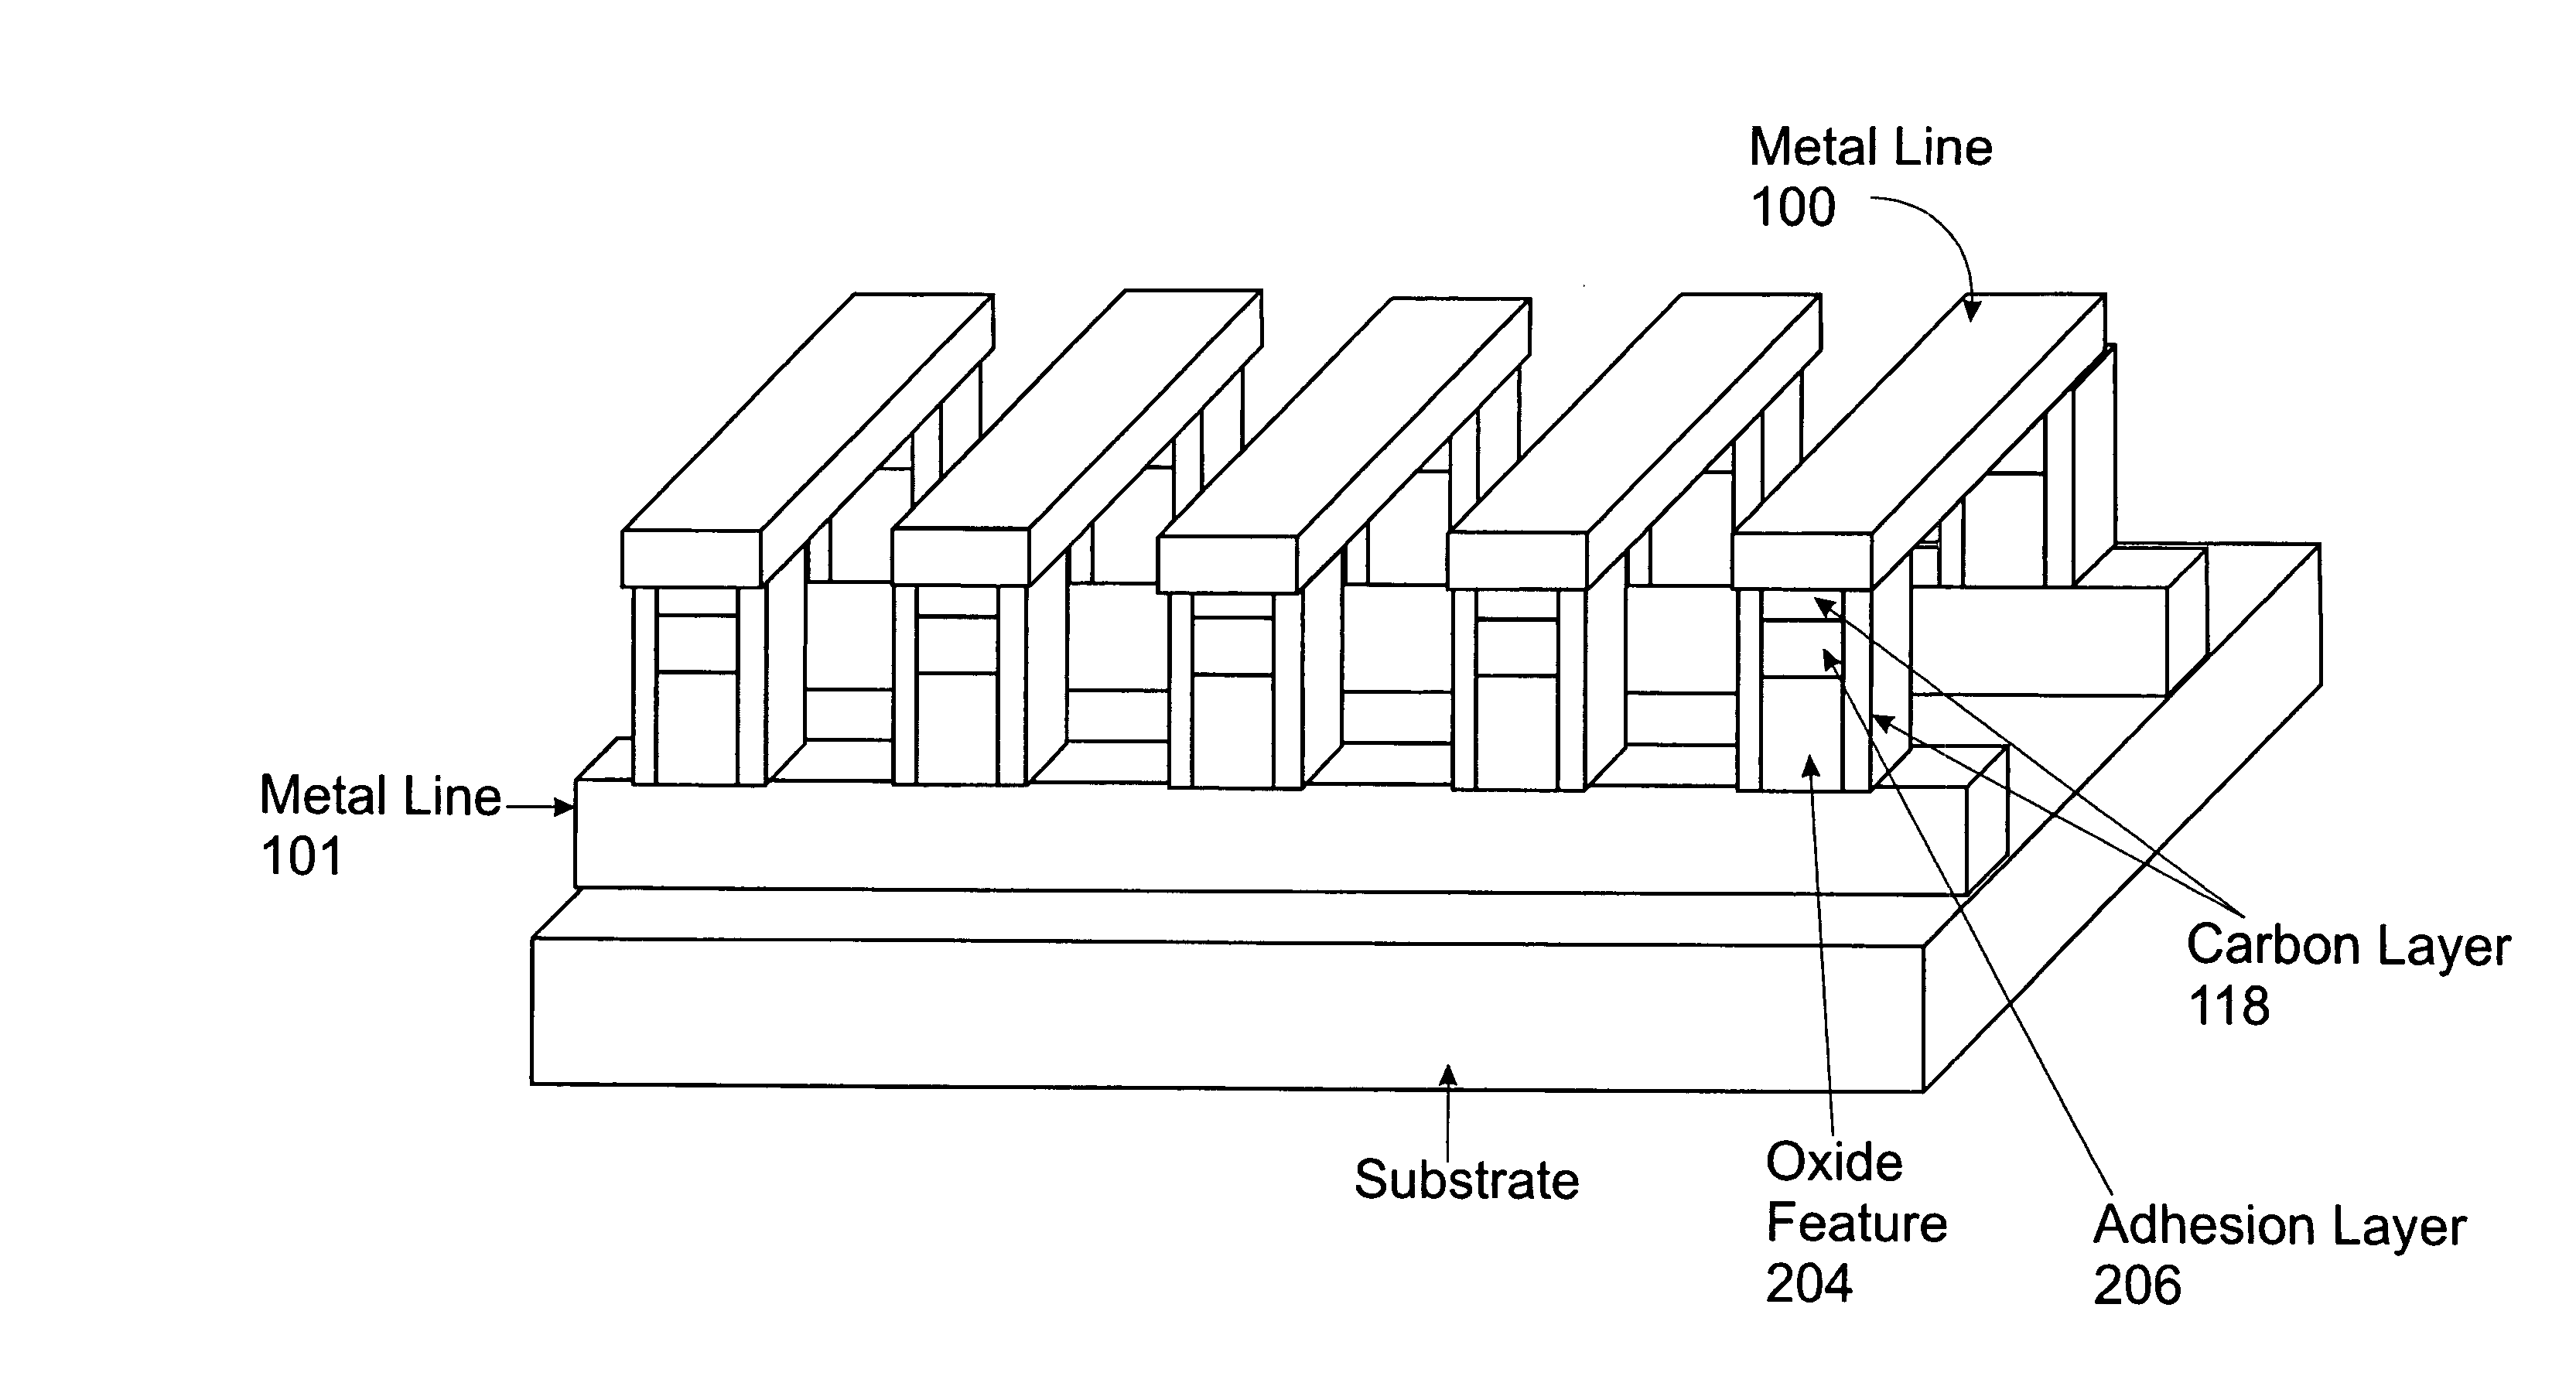 Multilevel nonvolatile memory device containing a carbon storage material and methods of making and using same